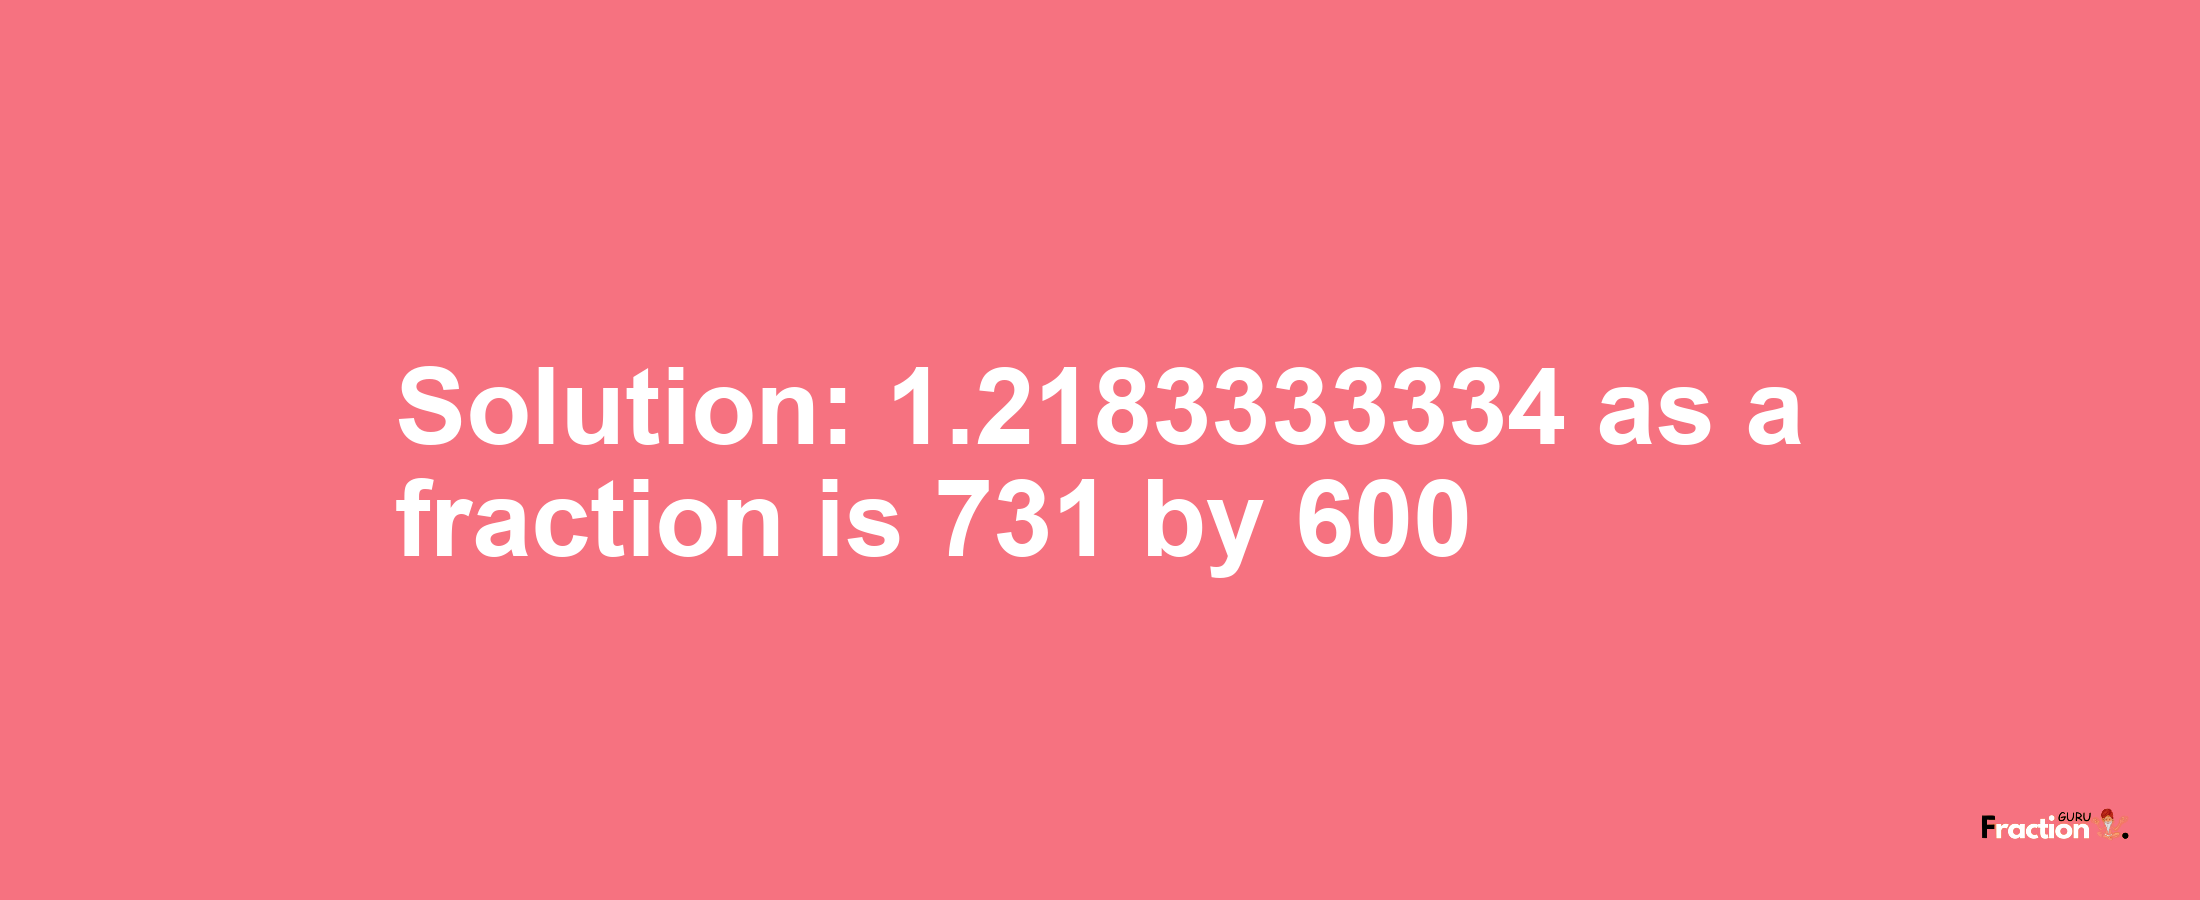 Solution:1.2183333334 as a fraction is 731/600